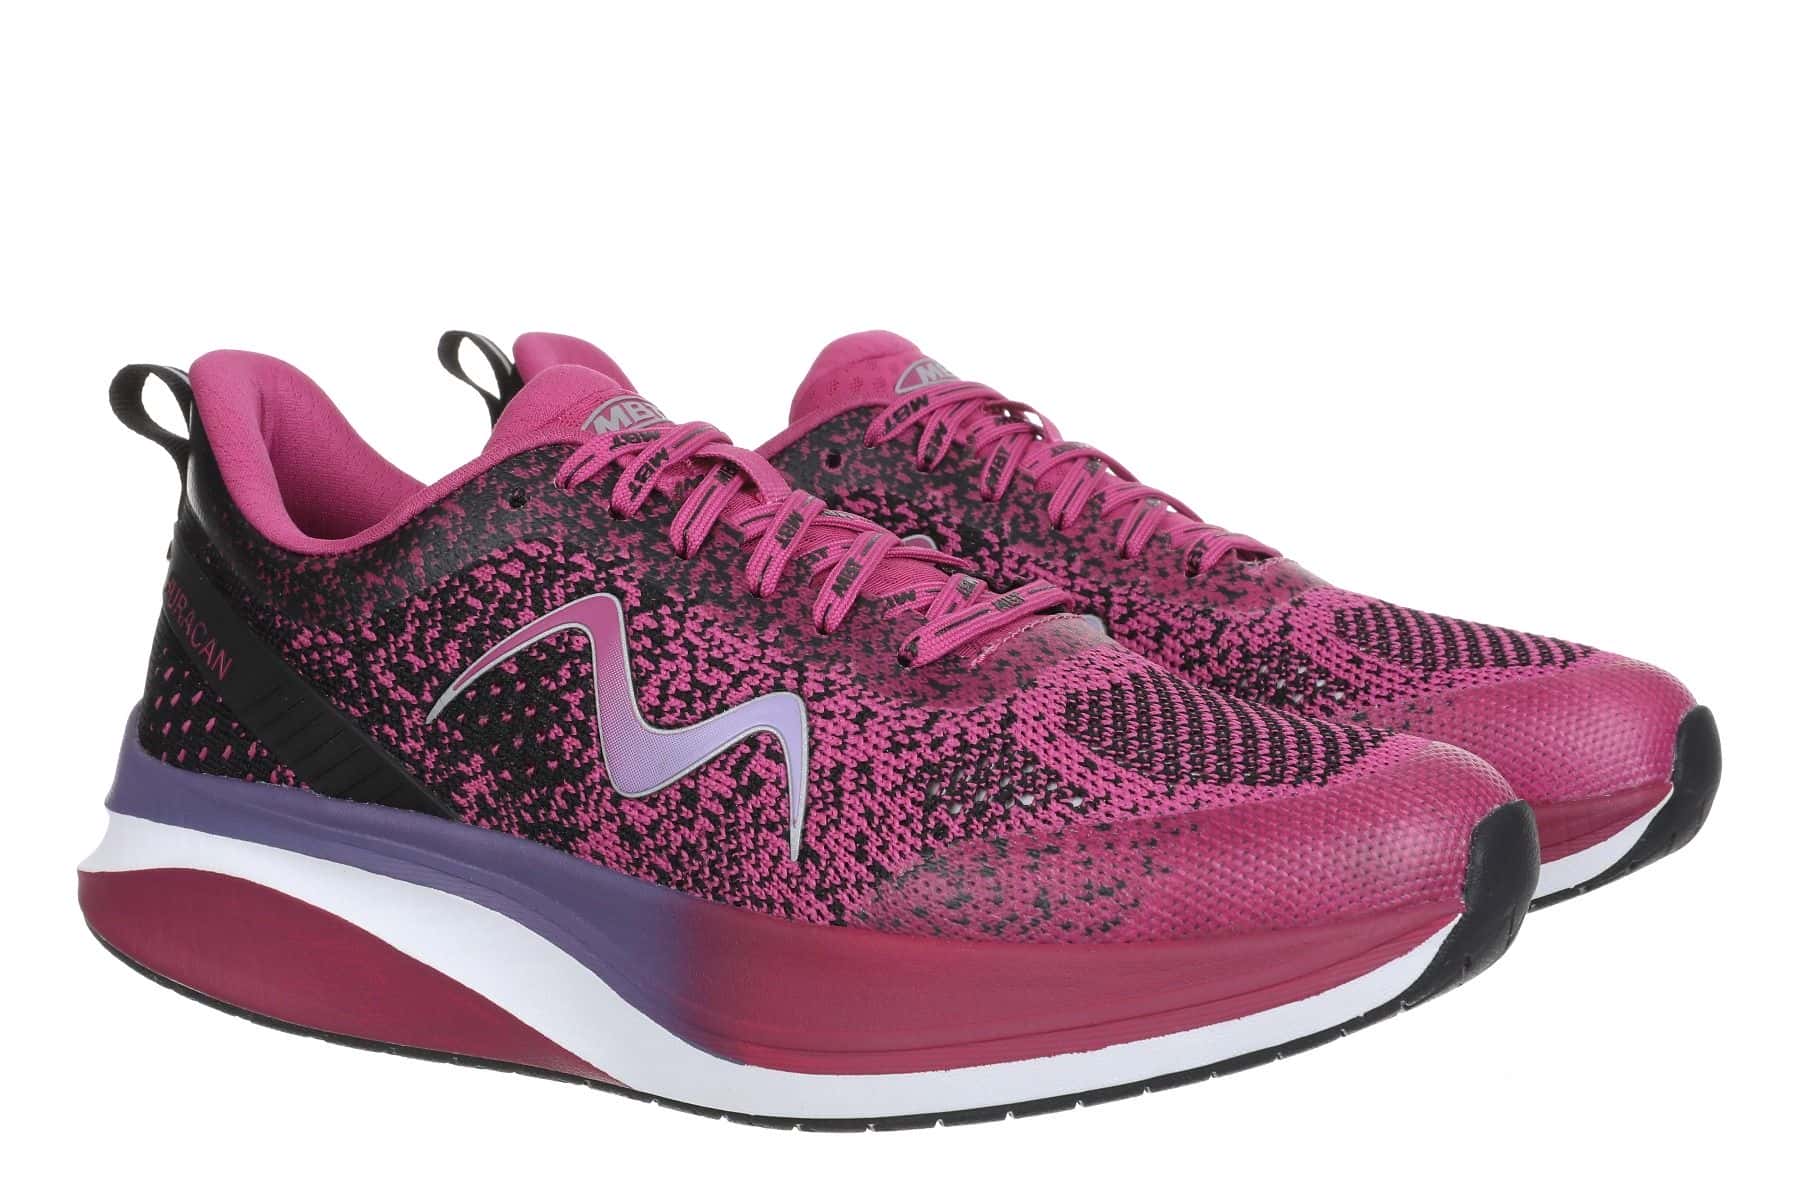 MBT HURACAN-3000 LACE UP WOMEN´S RUNNING SHOES BLACK/ORCHID FLOWER